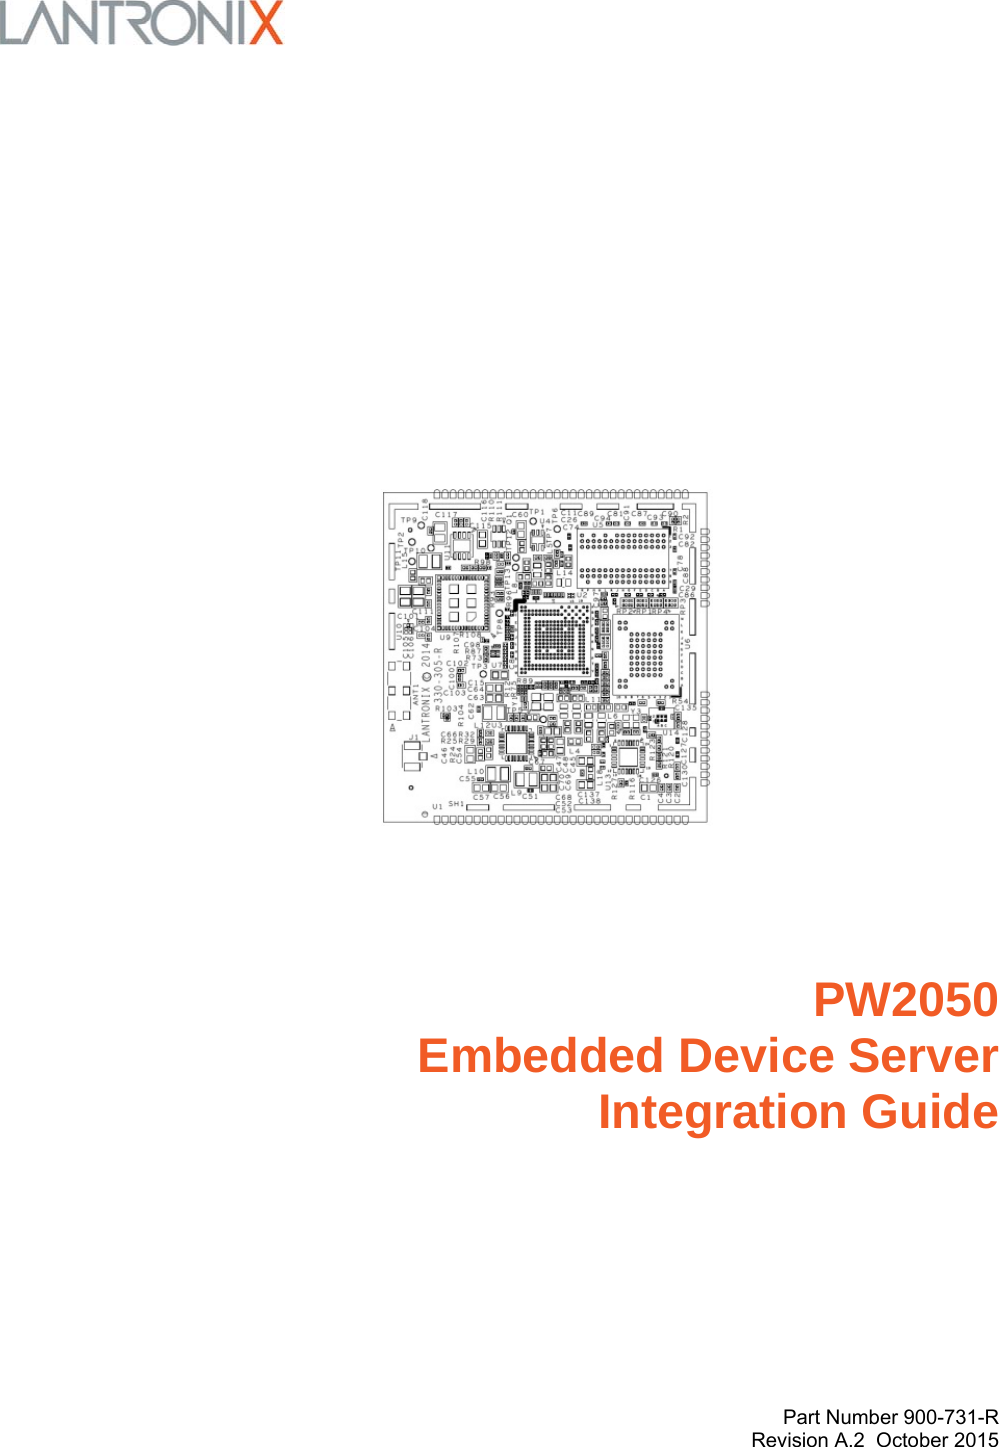        Part Number 900-731-R Revision A.2  October 2015                          PW2050  Embedded Device Server  Integration Guide 